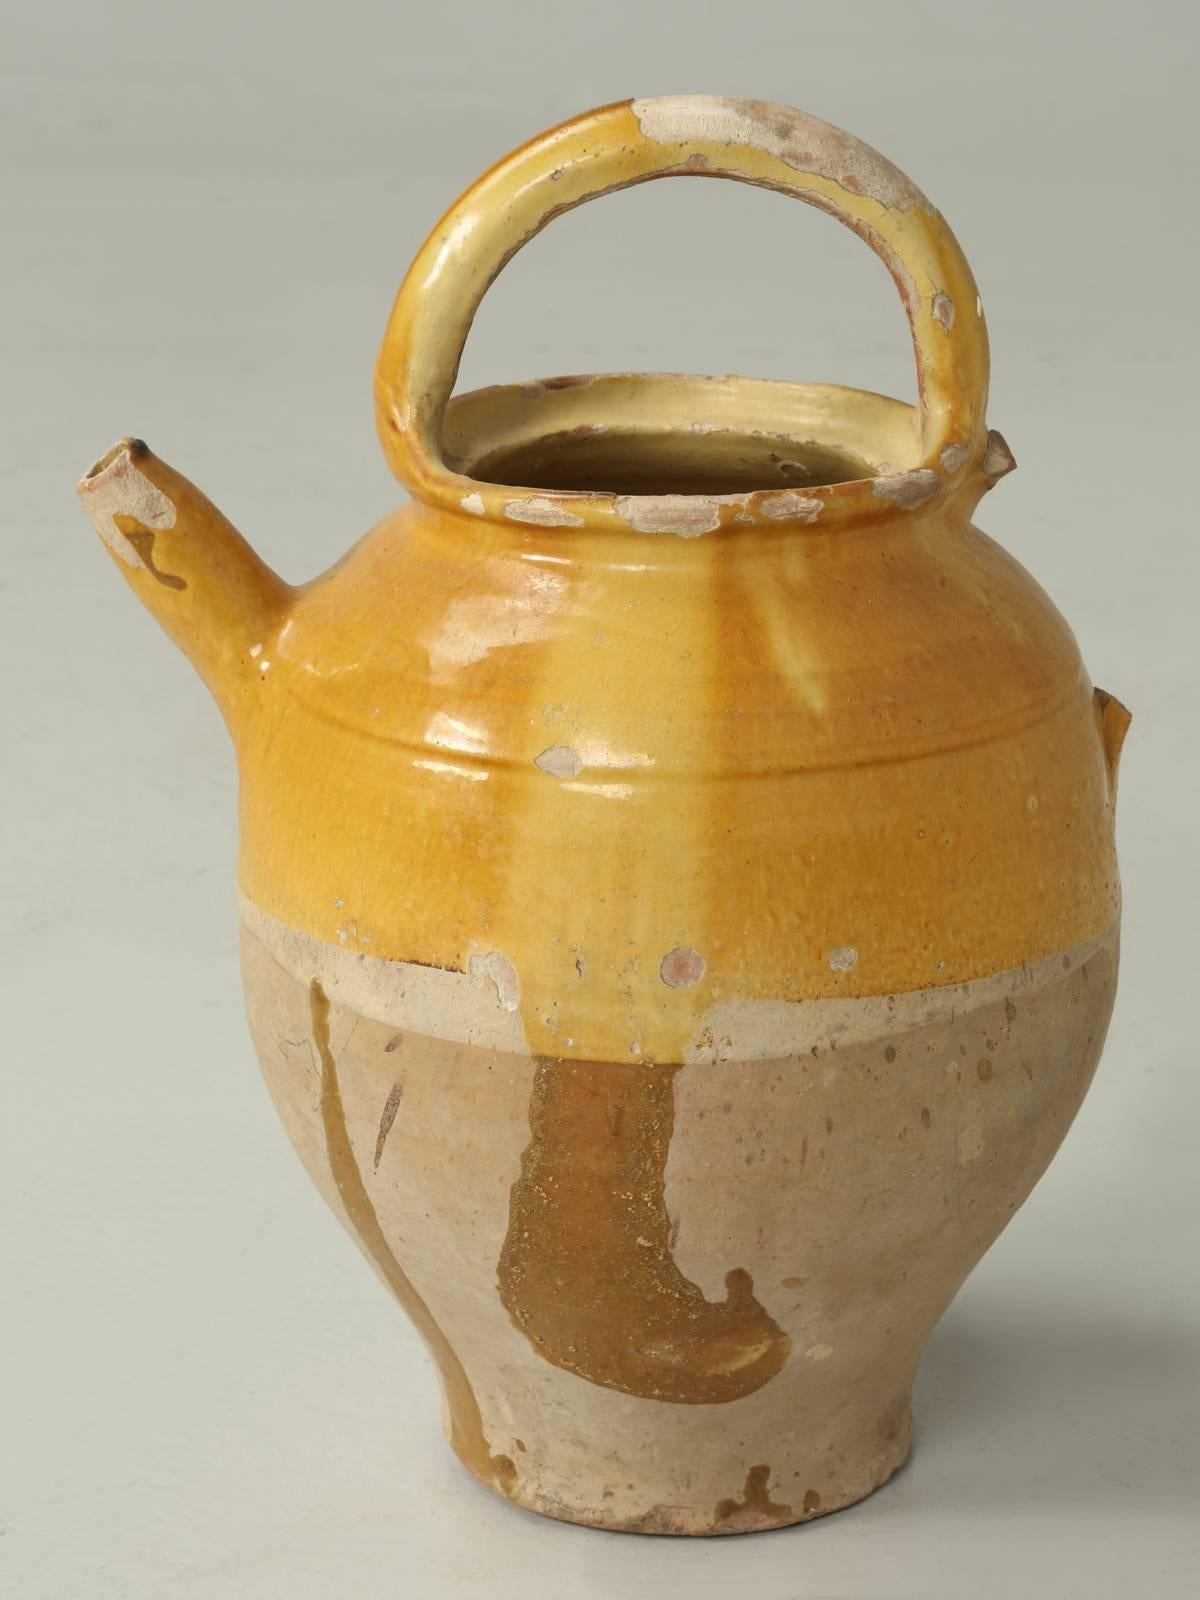 Original French Turn-of-the-century 19th c. Pottery Water Pitcher, or cruche, with top handle and pouring spout.  Commonly used for transporting and storing water. We have numerous pieces of French 19th c pottery, all in their original yellow